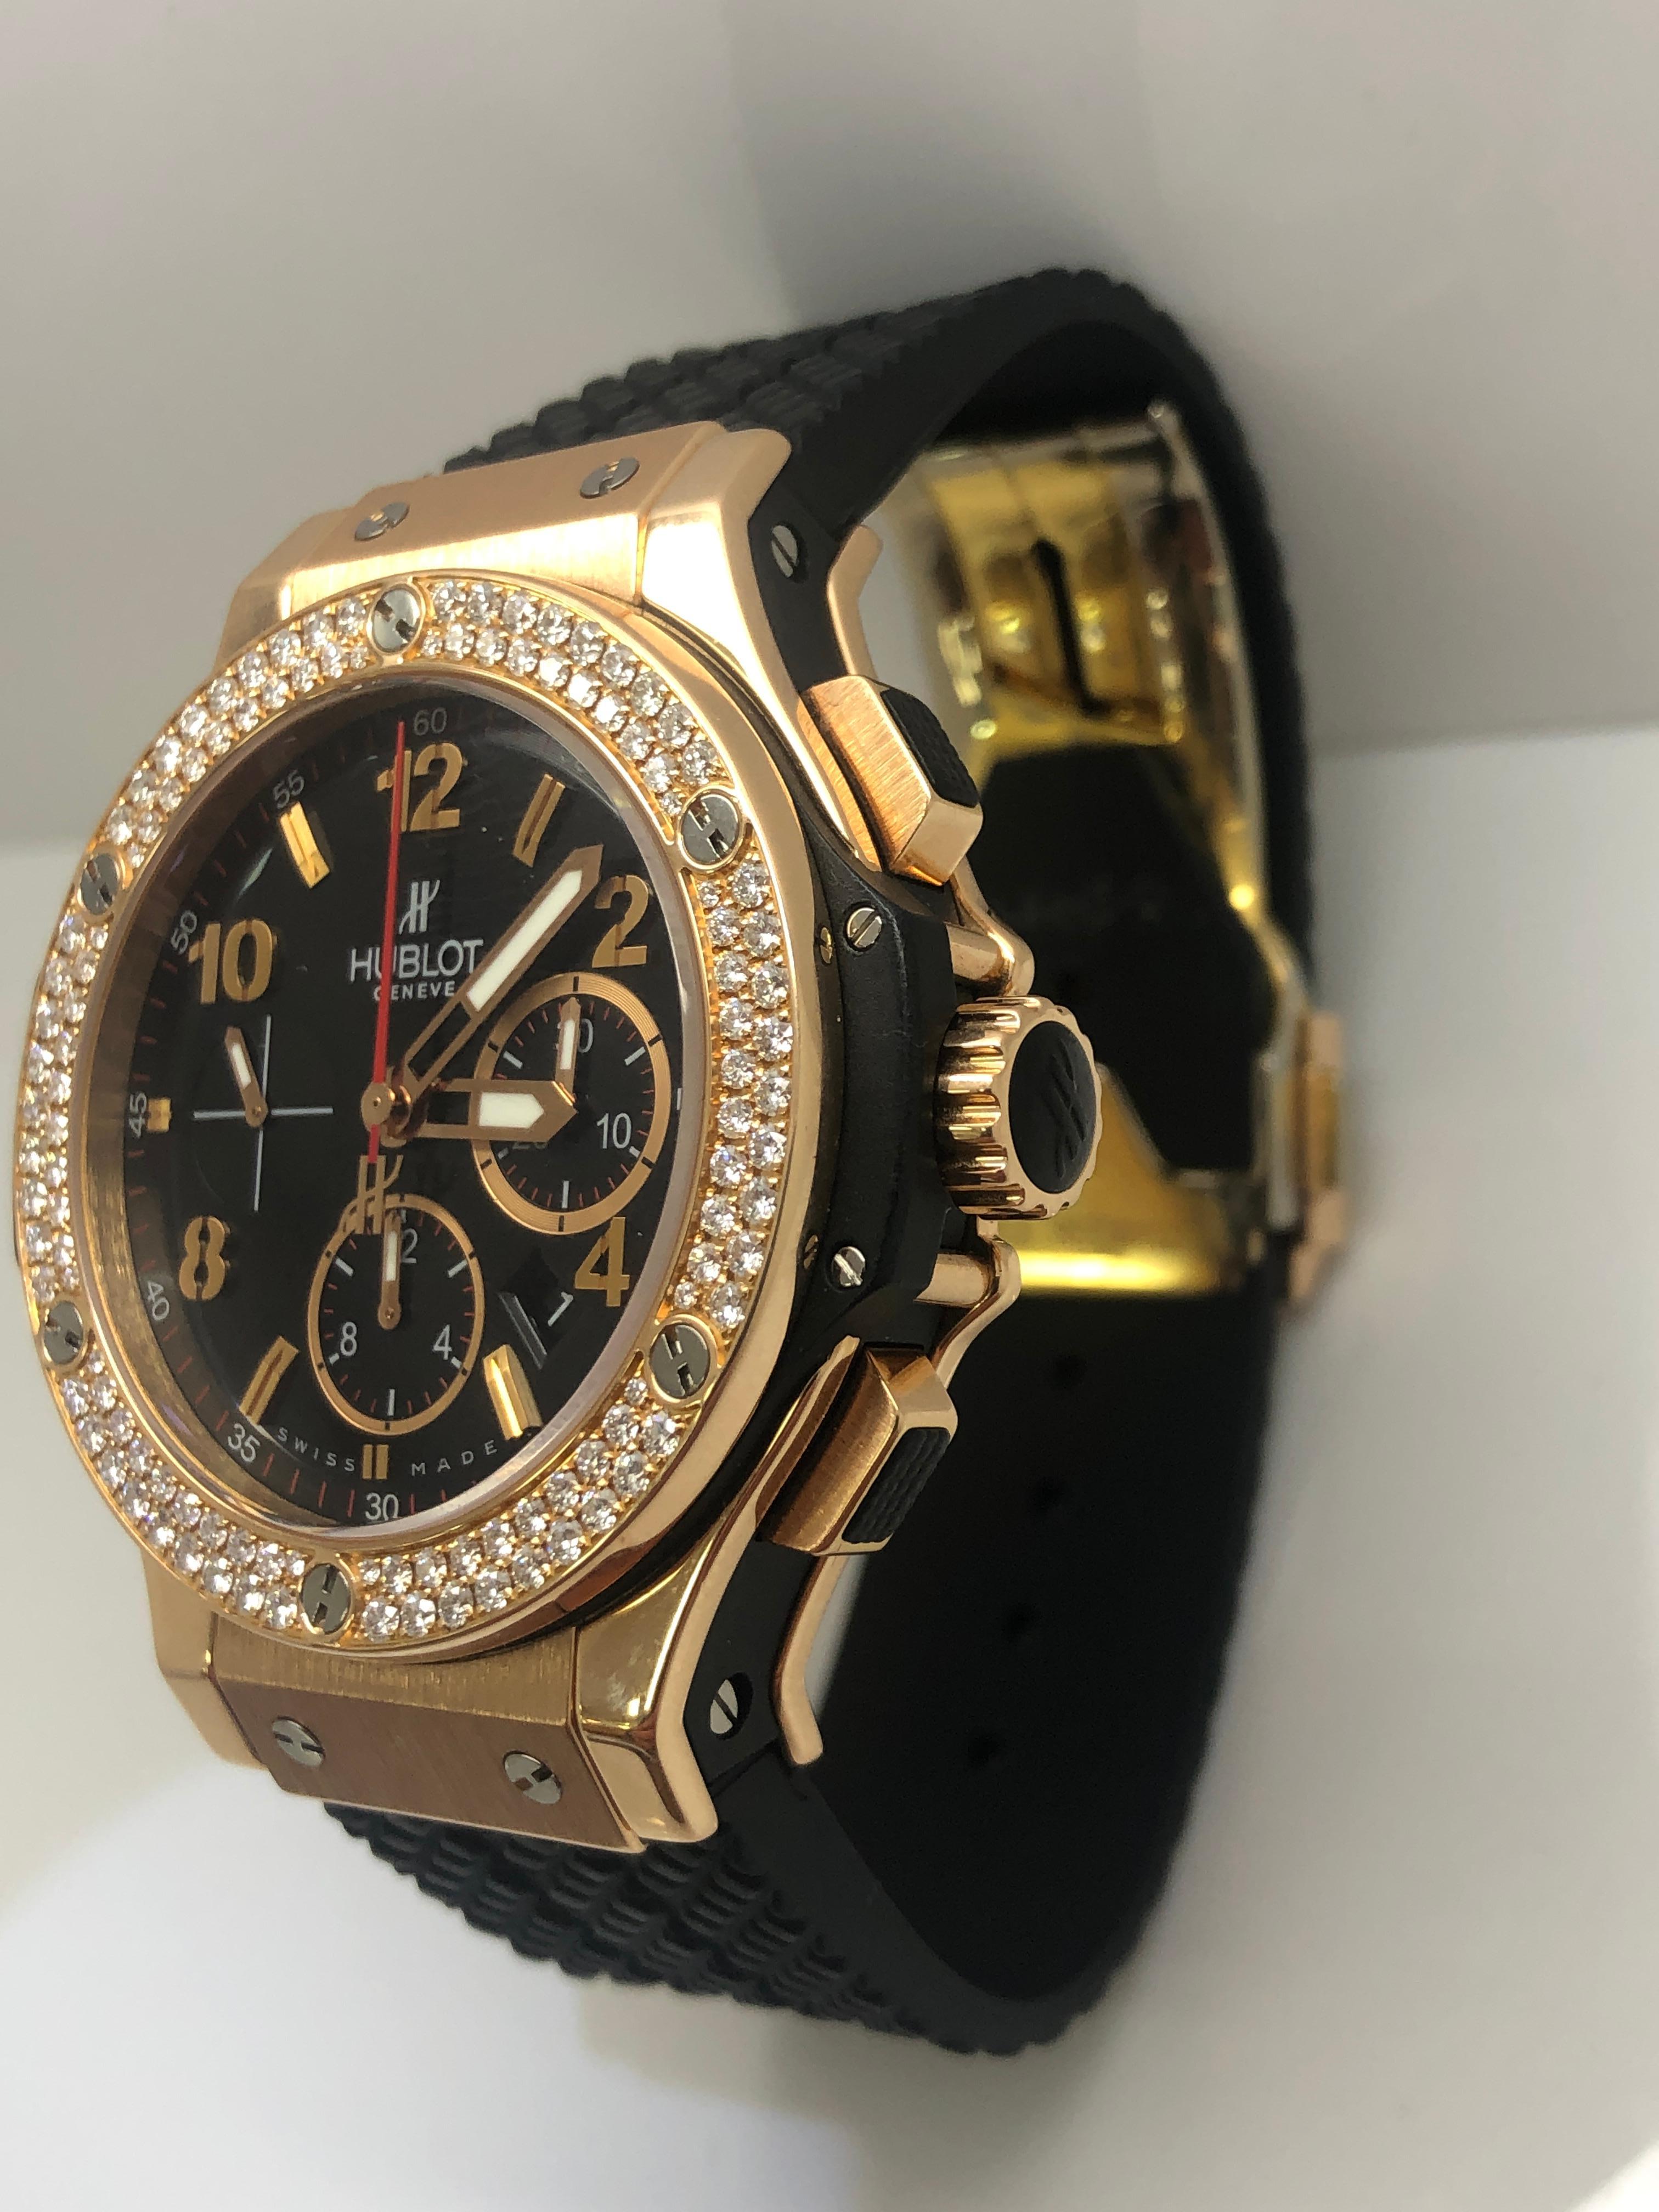 Hubolt Big Bang 301 Diamond Bezel 18k Gold Men's Watch

excellent condition

comes with original papers/card

2 year warranty

free overnight shipping

shop with confidence